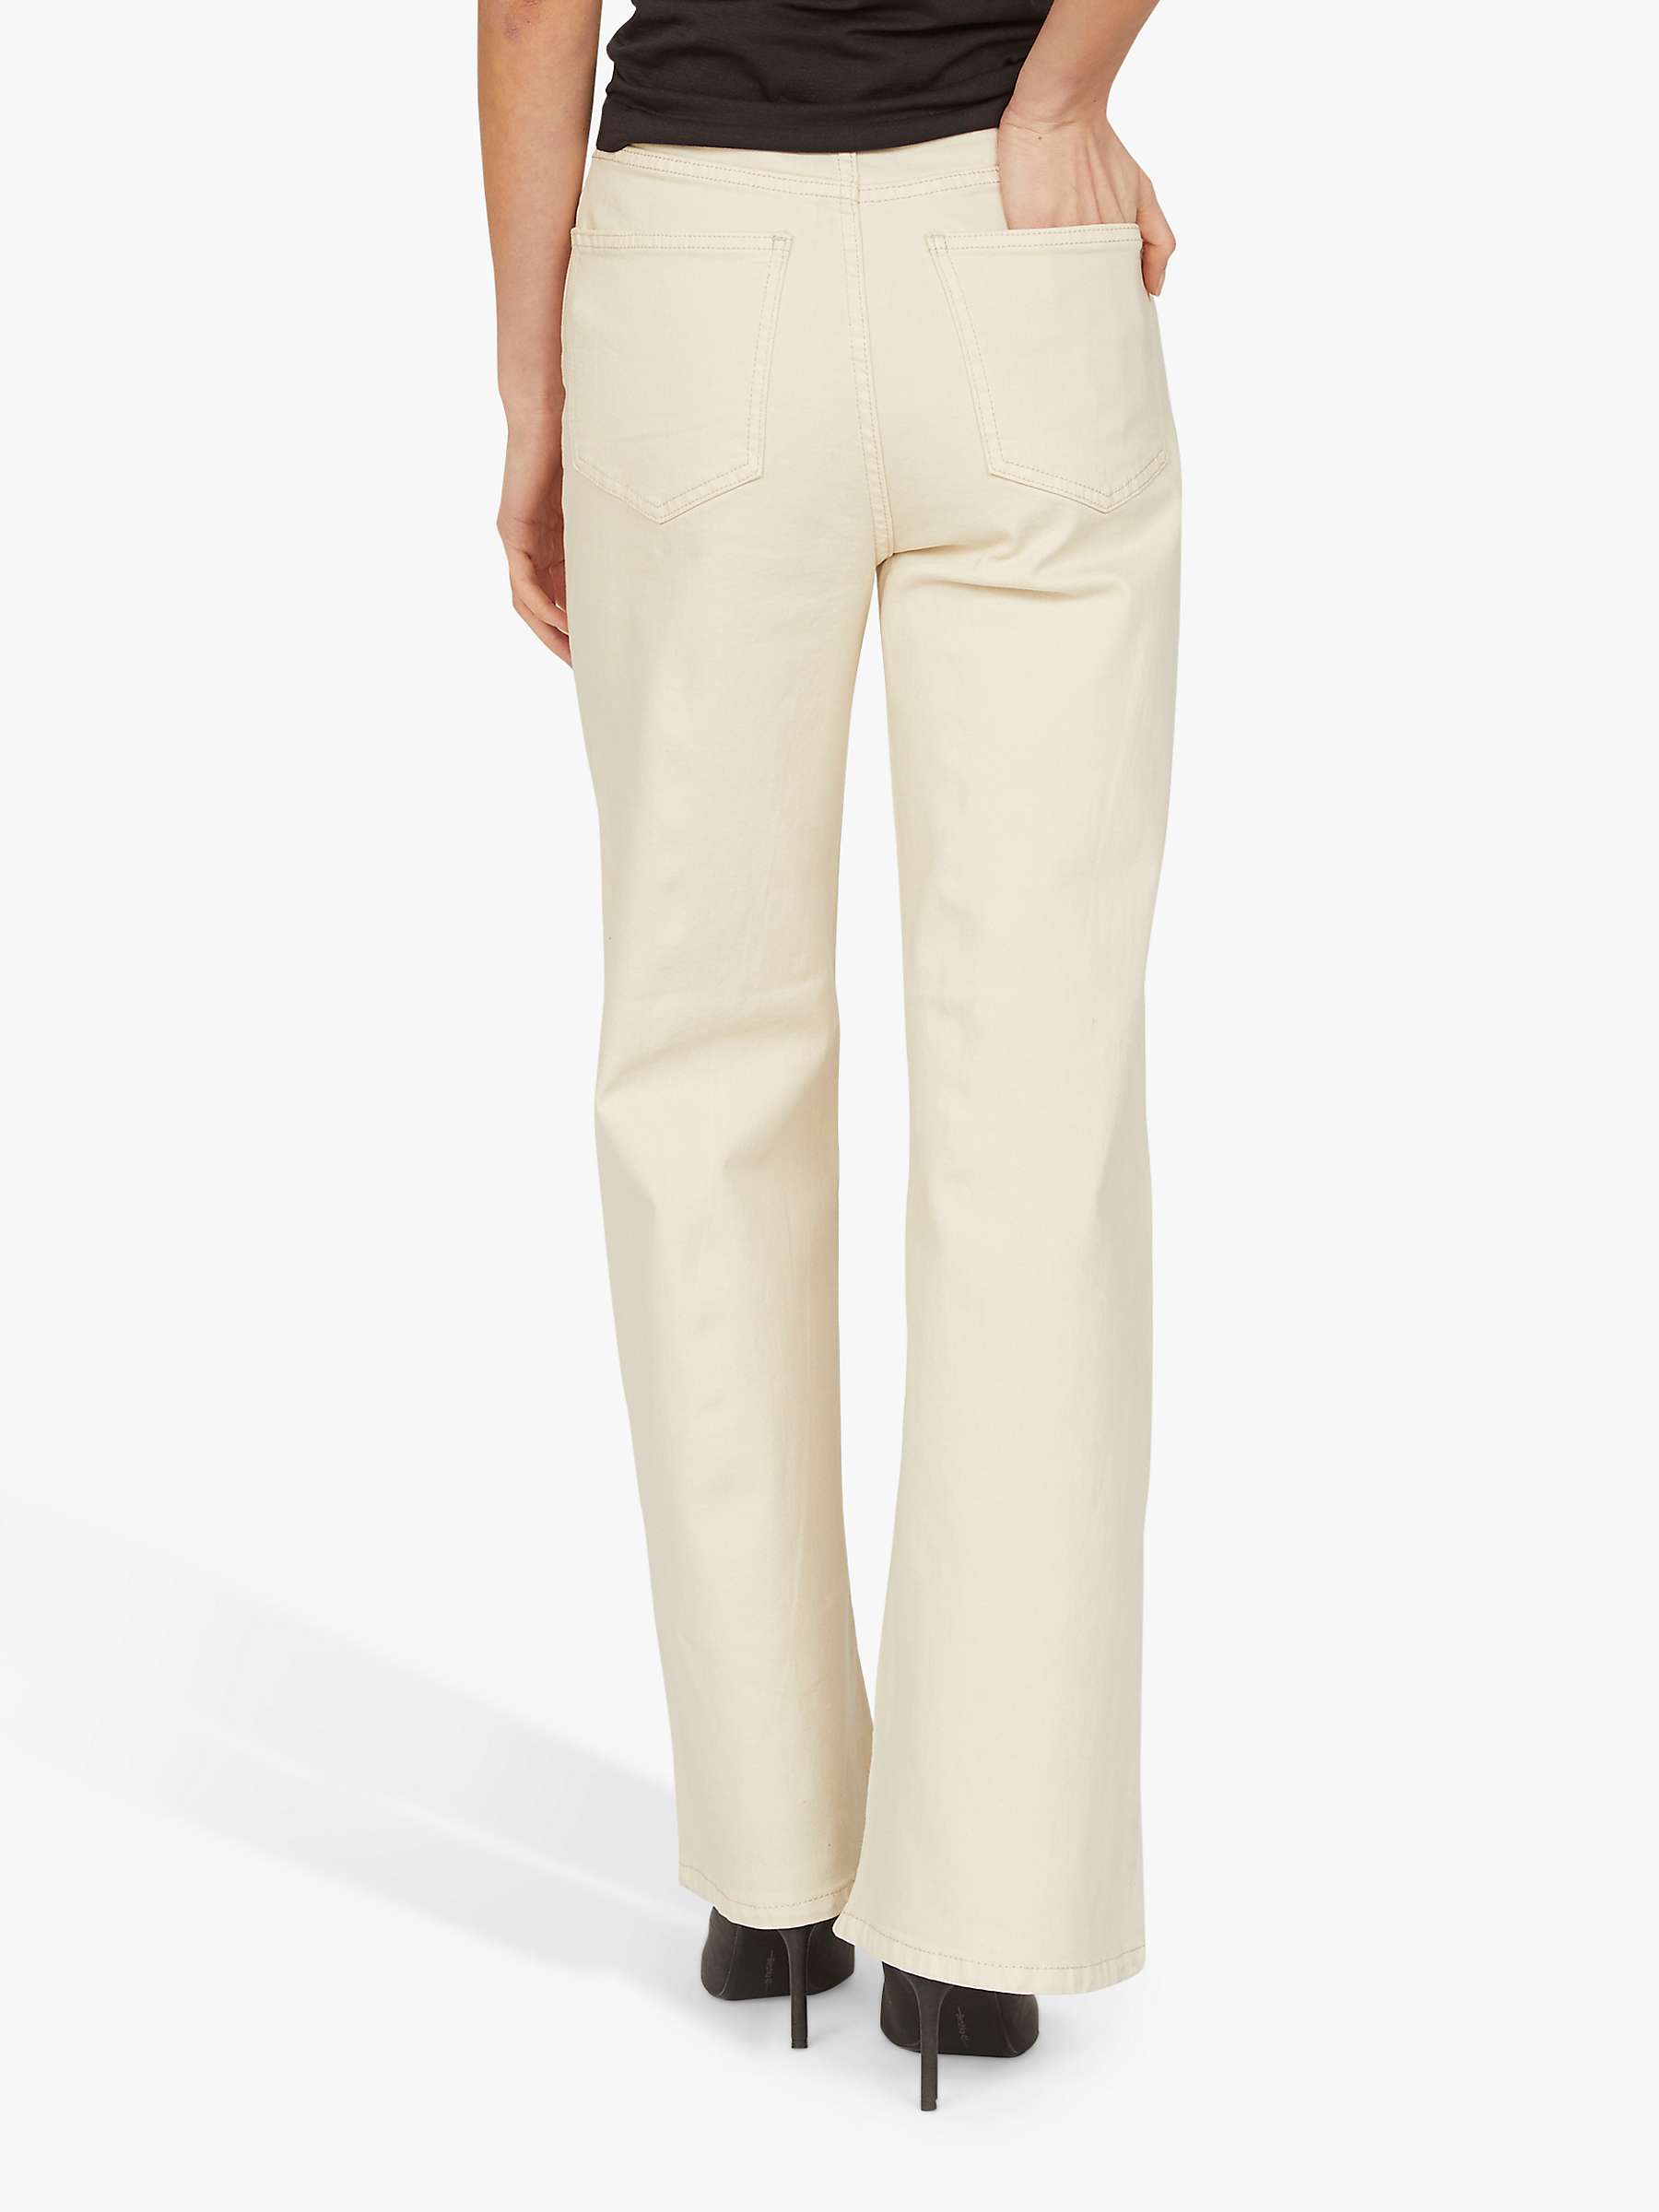 Buy Sisters Point Owi Wide Leg Jeans, Porcelain Online at johnlewis.com